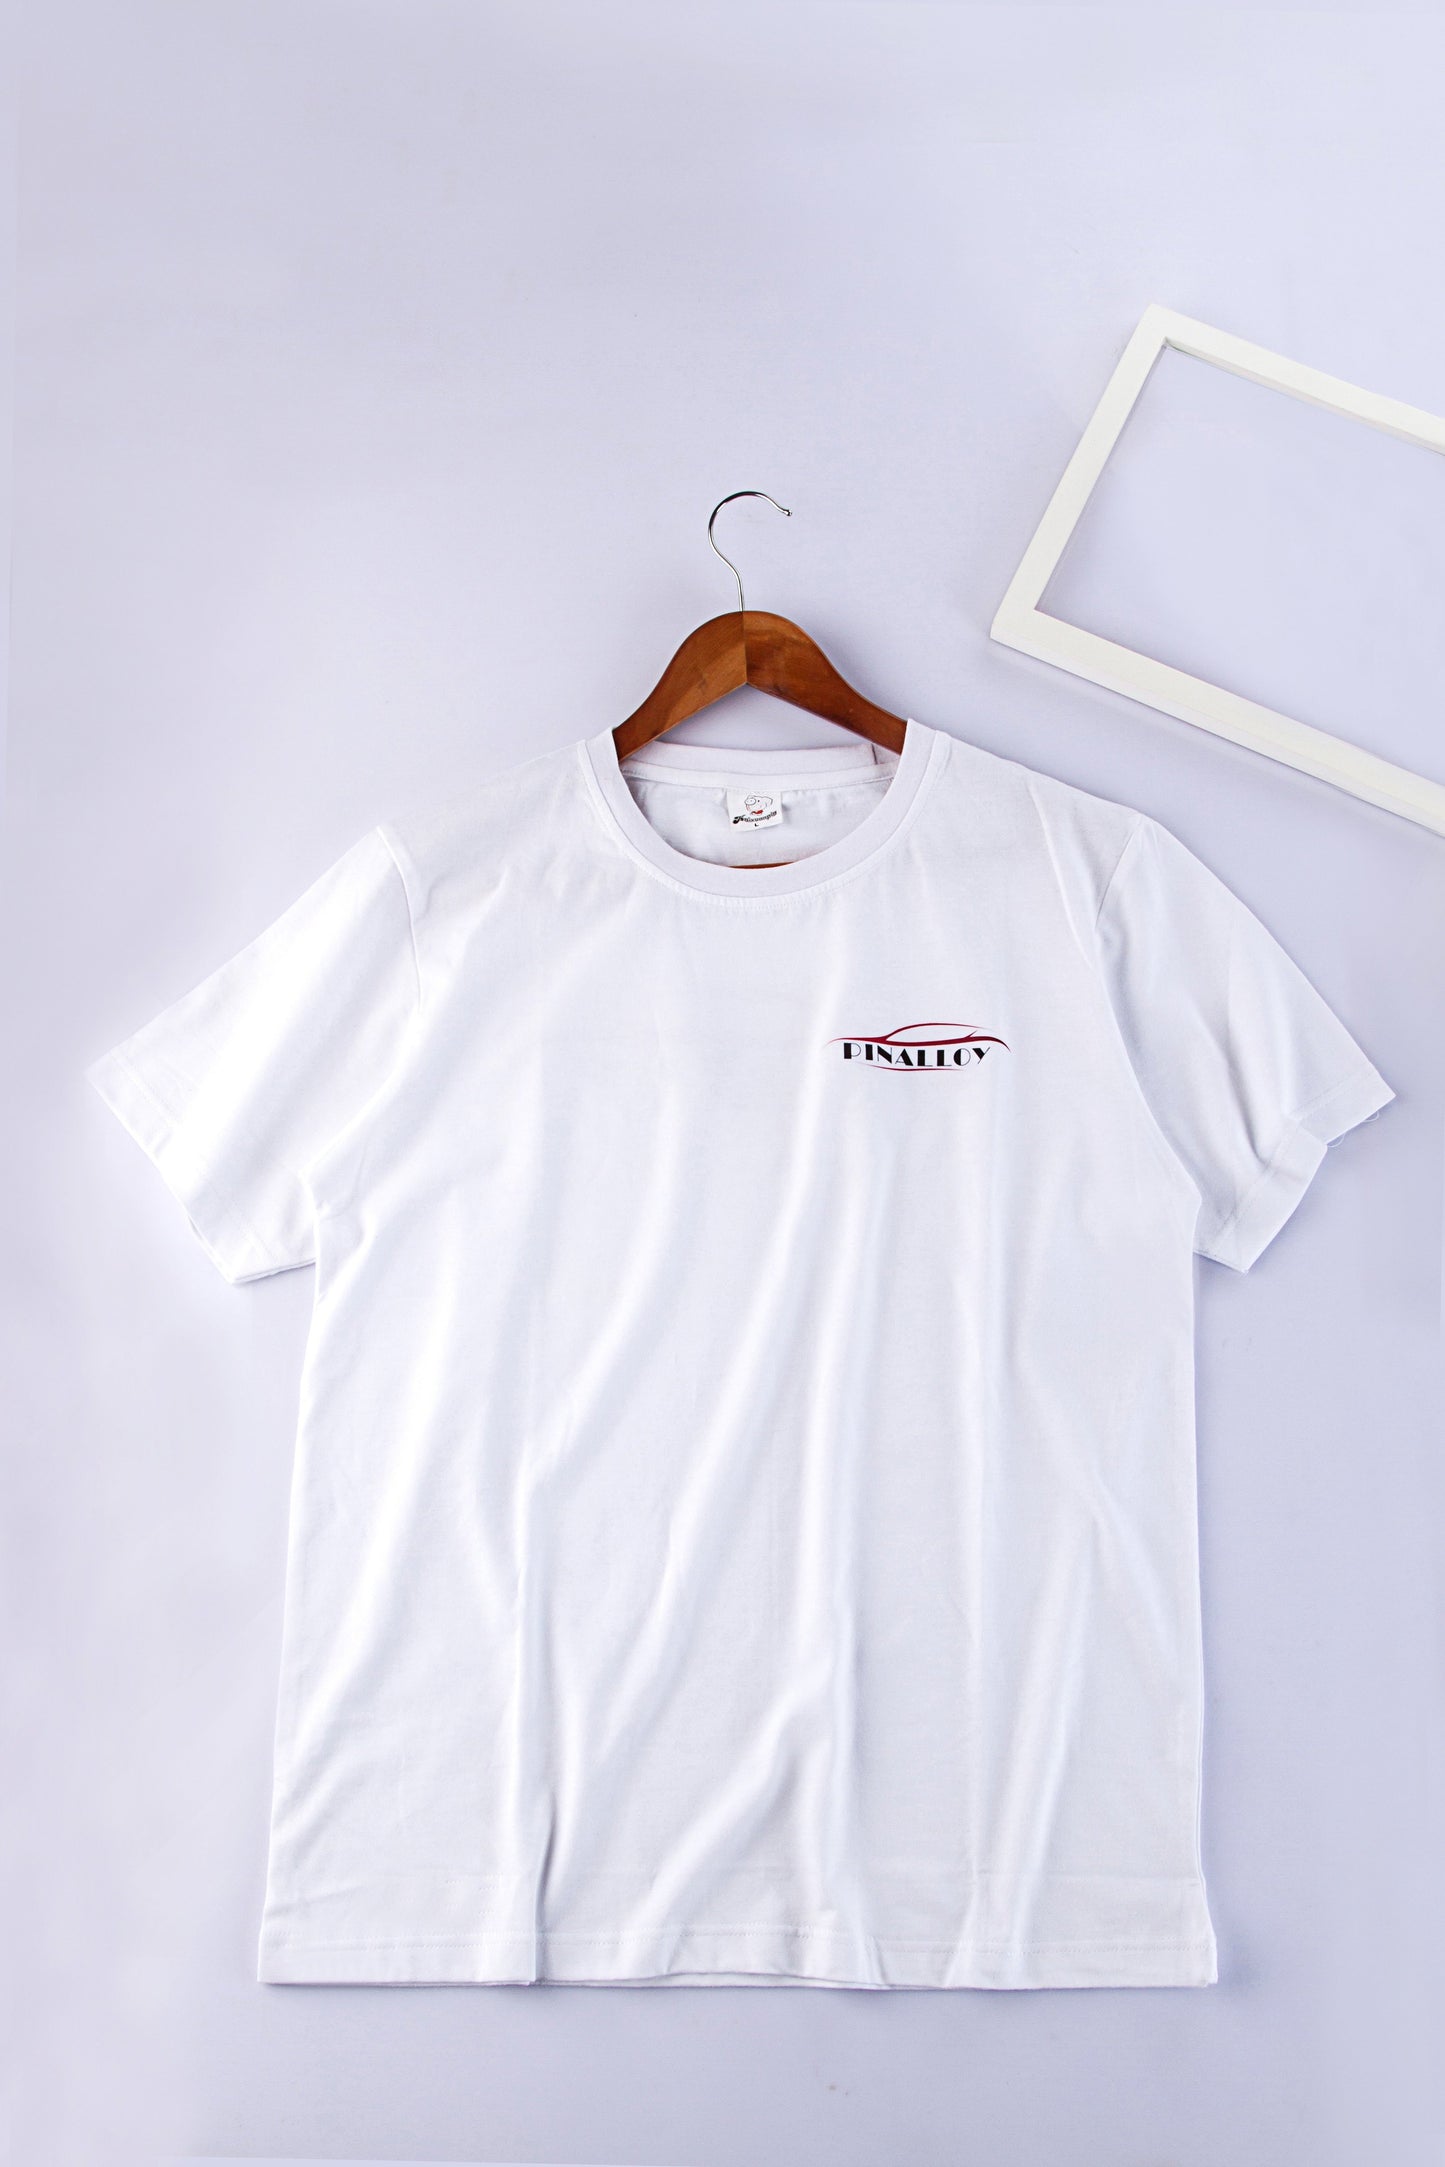 Pinalloy Classic Short Sleeve White Summer Round Neck Tee Cotton Printed T-Shirt - Pinalloy Online Auto Accessories Lightweight Car Kit 